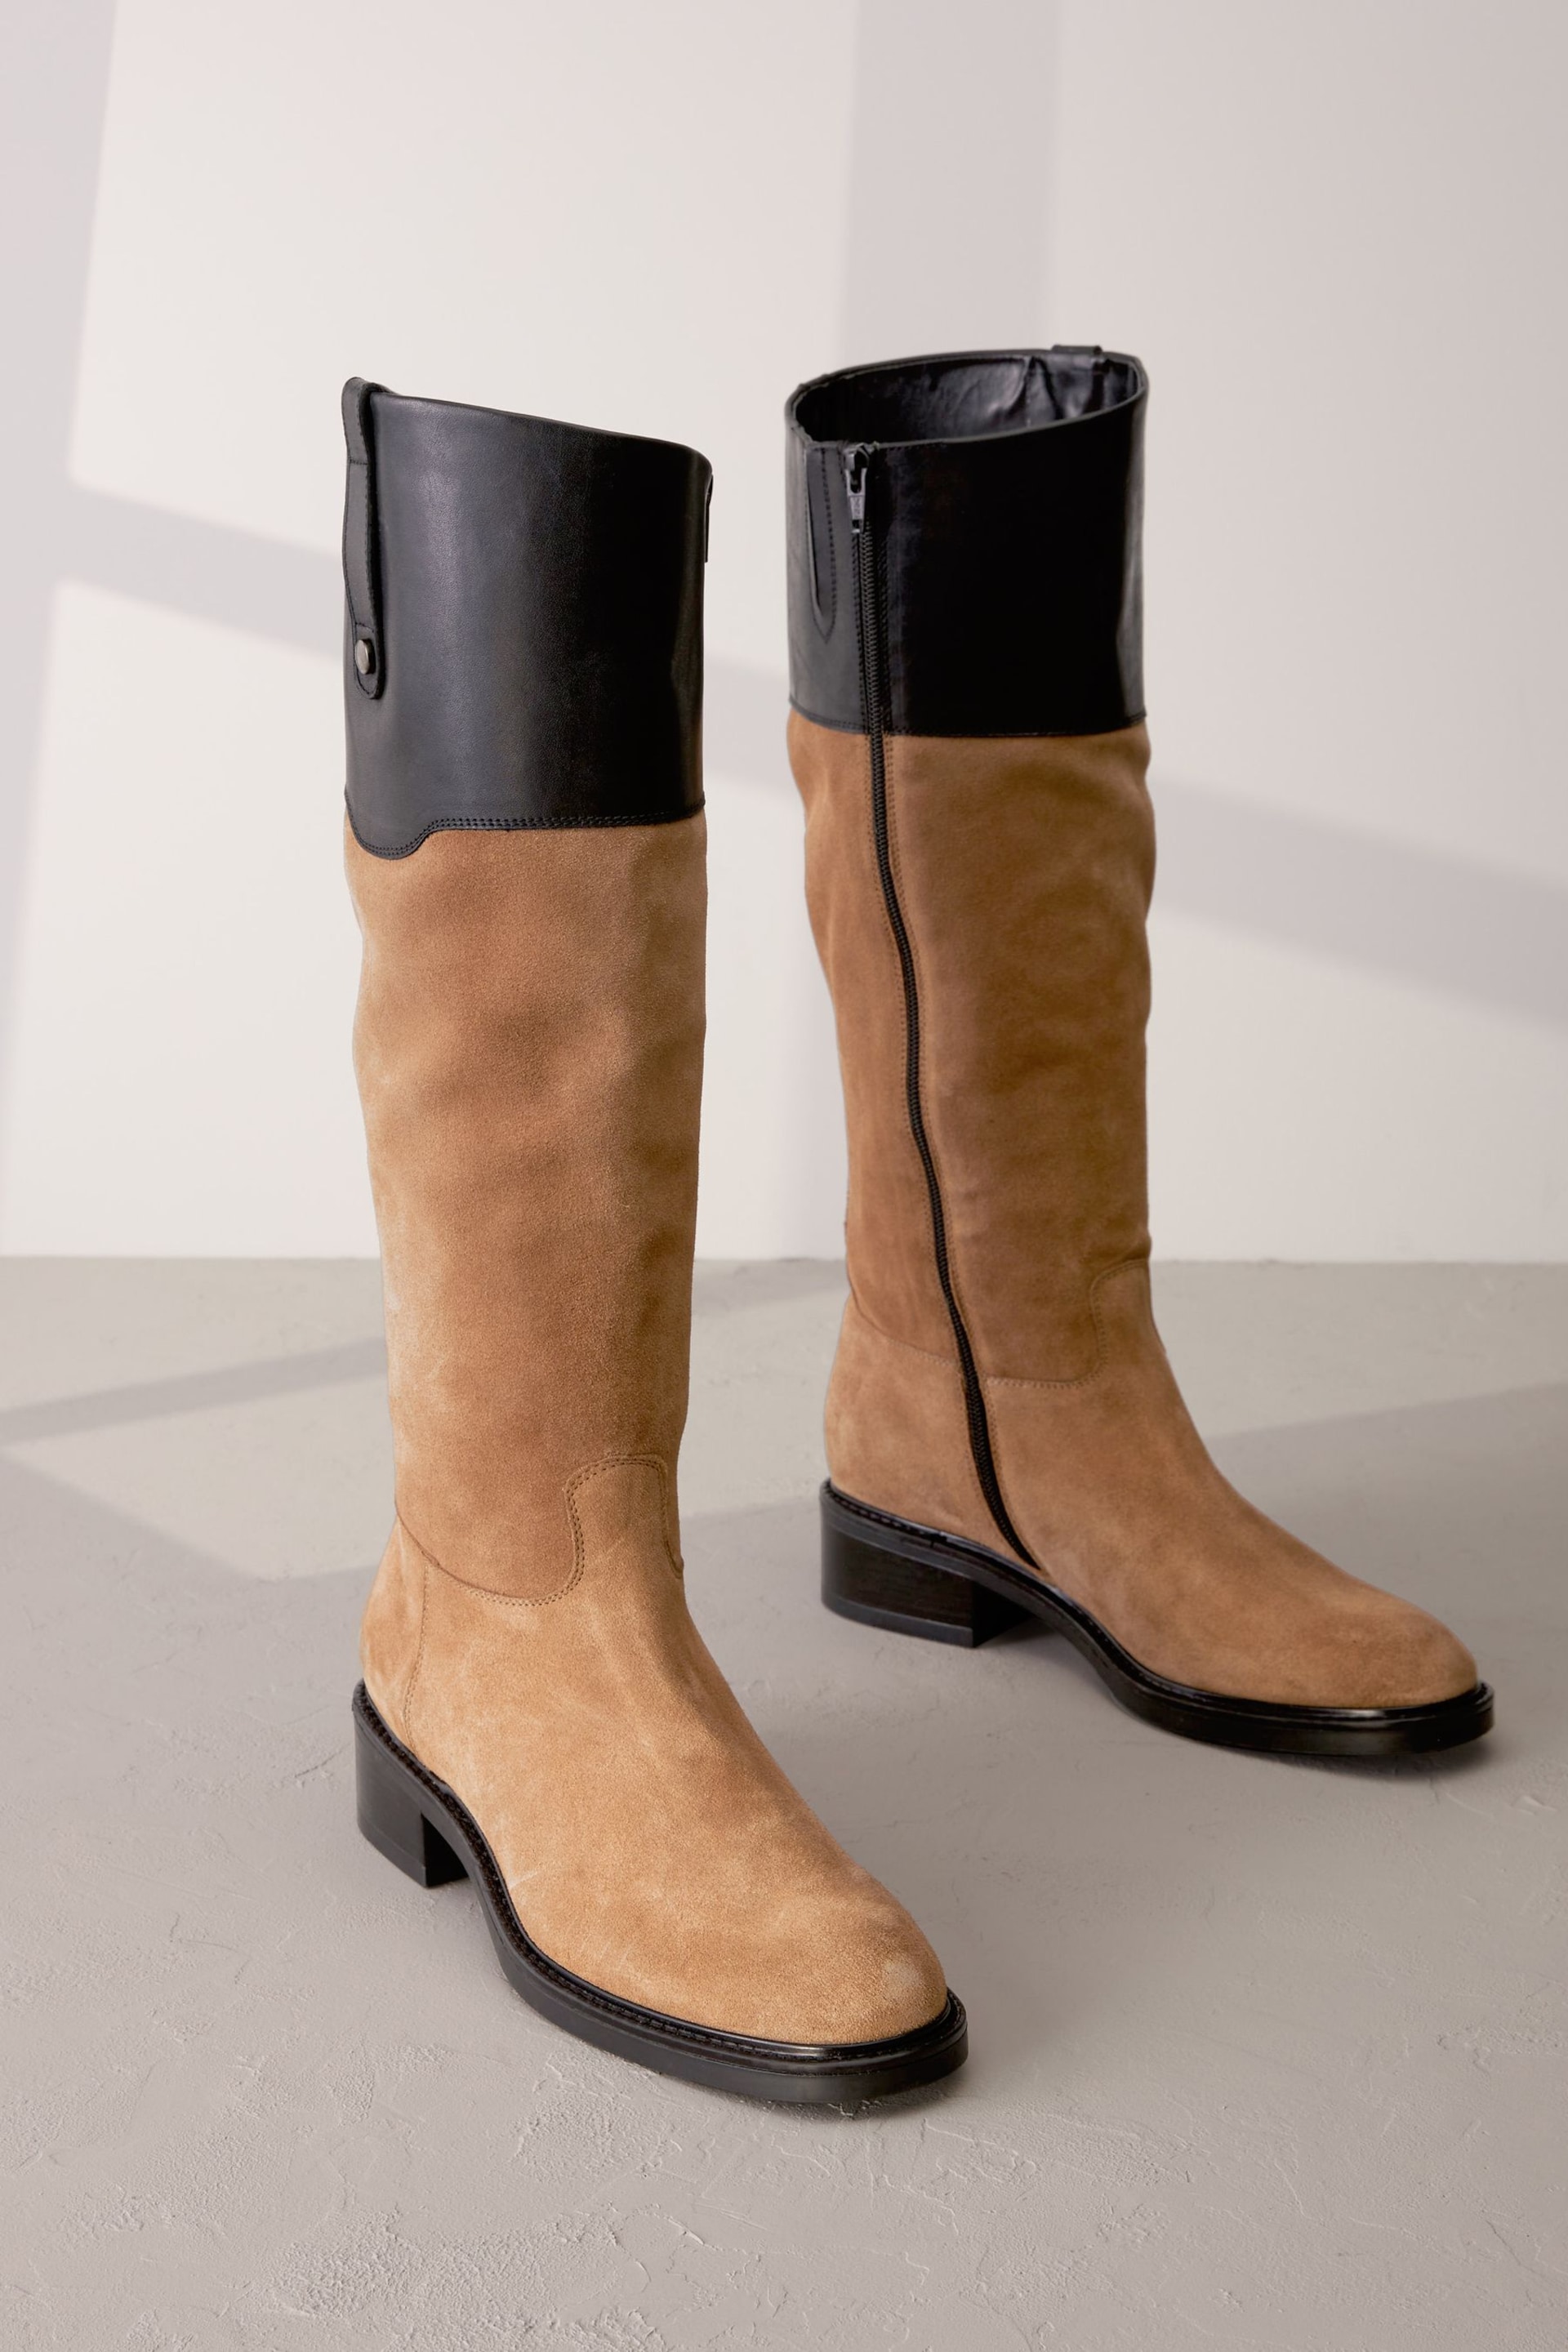 Tan & Black Signature Leather Panelled Rider Knee High Boots - Image 1 of 6